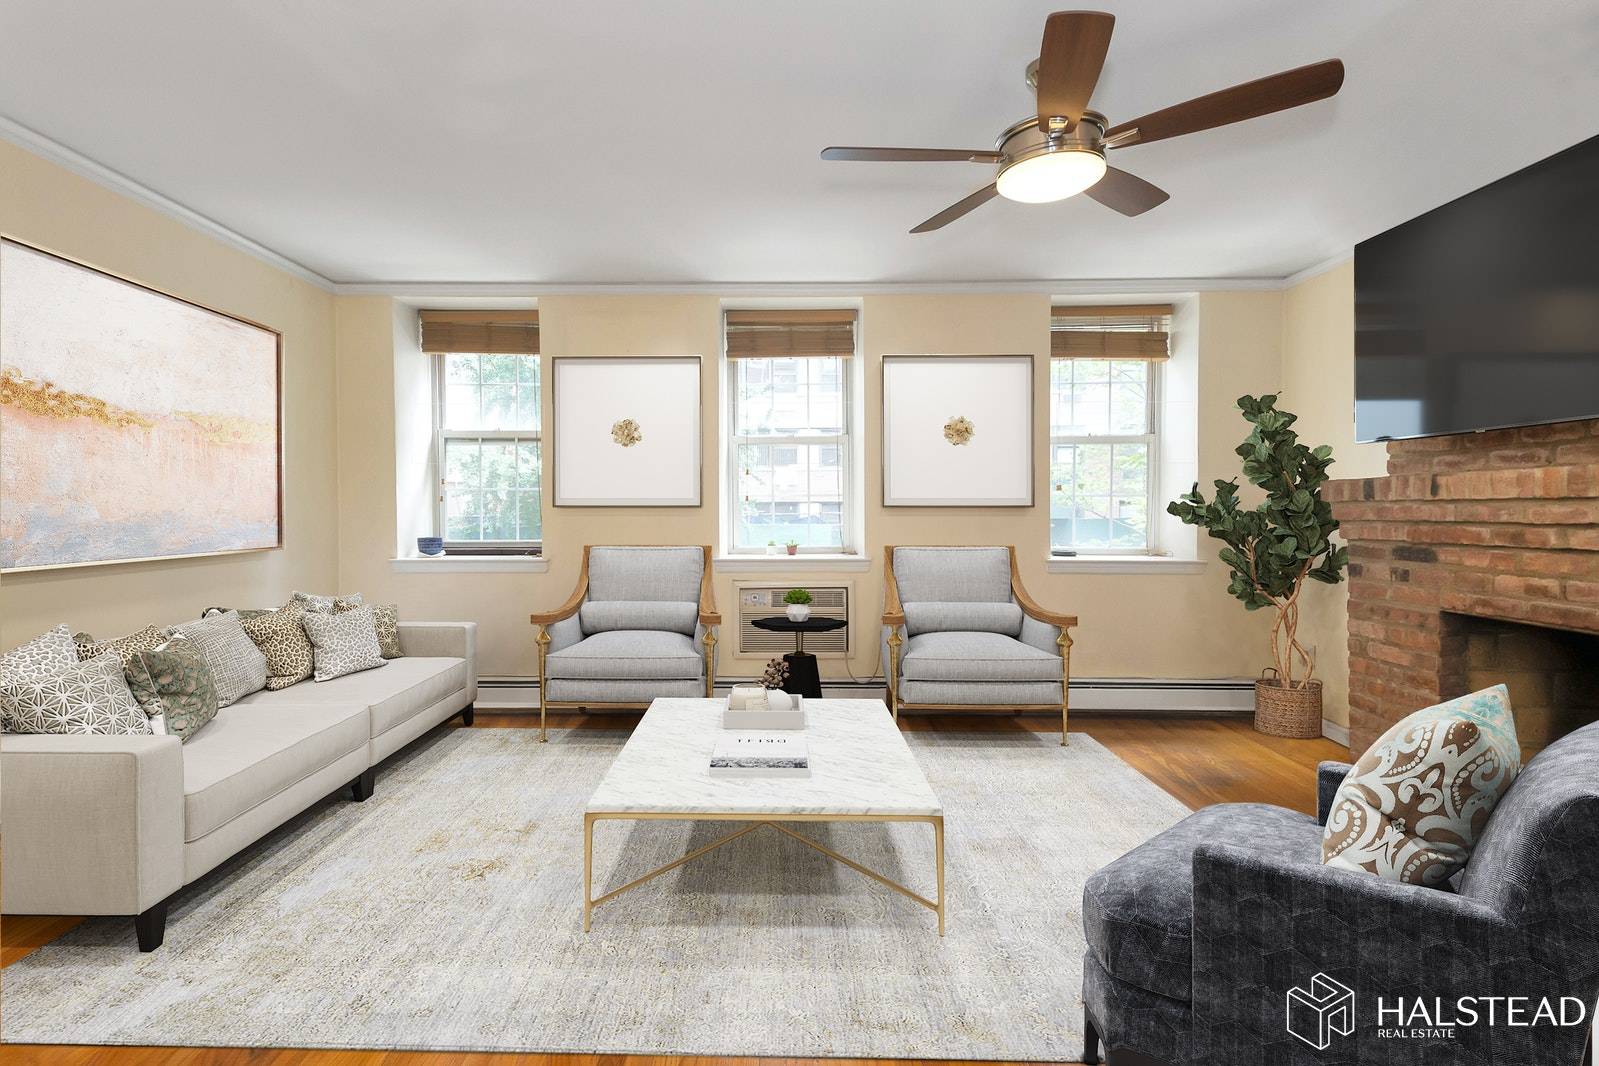 This 2 bedroom, 2. 5 bath triplex apartment is located on a charming tree lined street that one wouldn't expect to find in the heart of Manhattan's popular Midtown East.